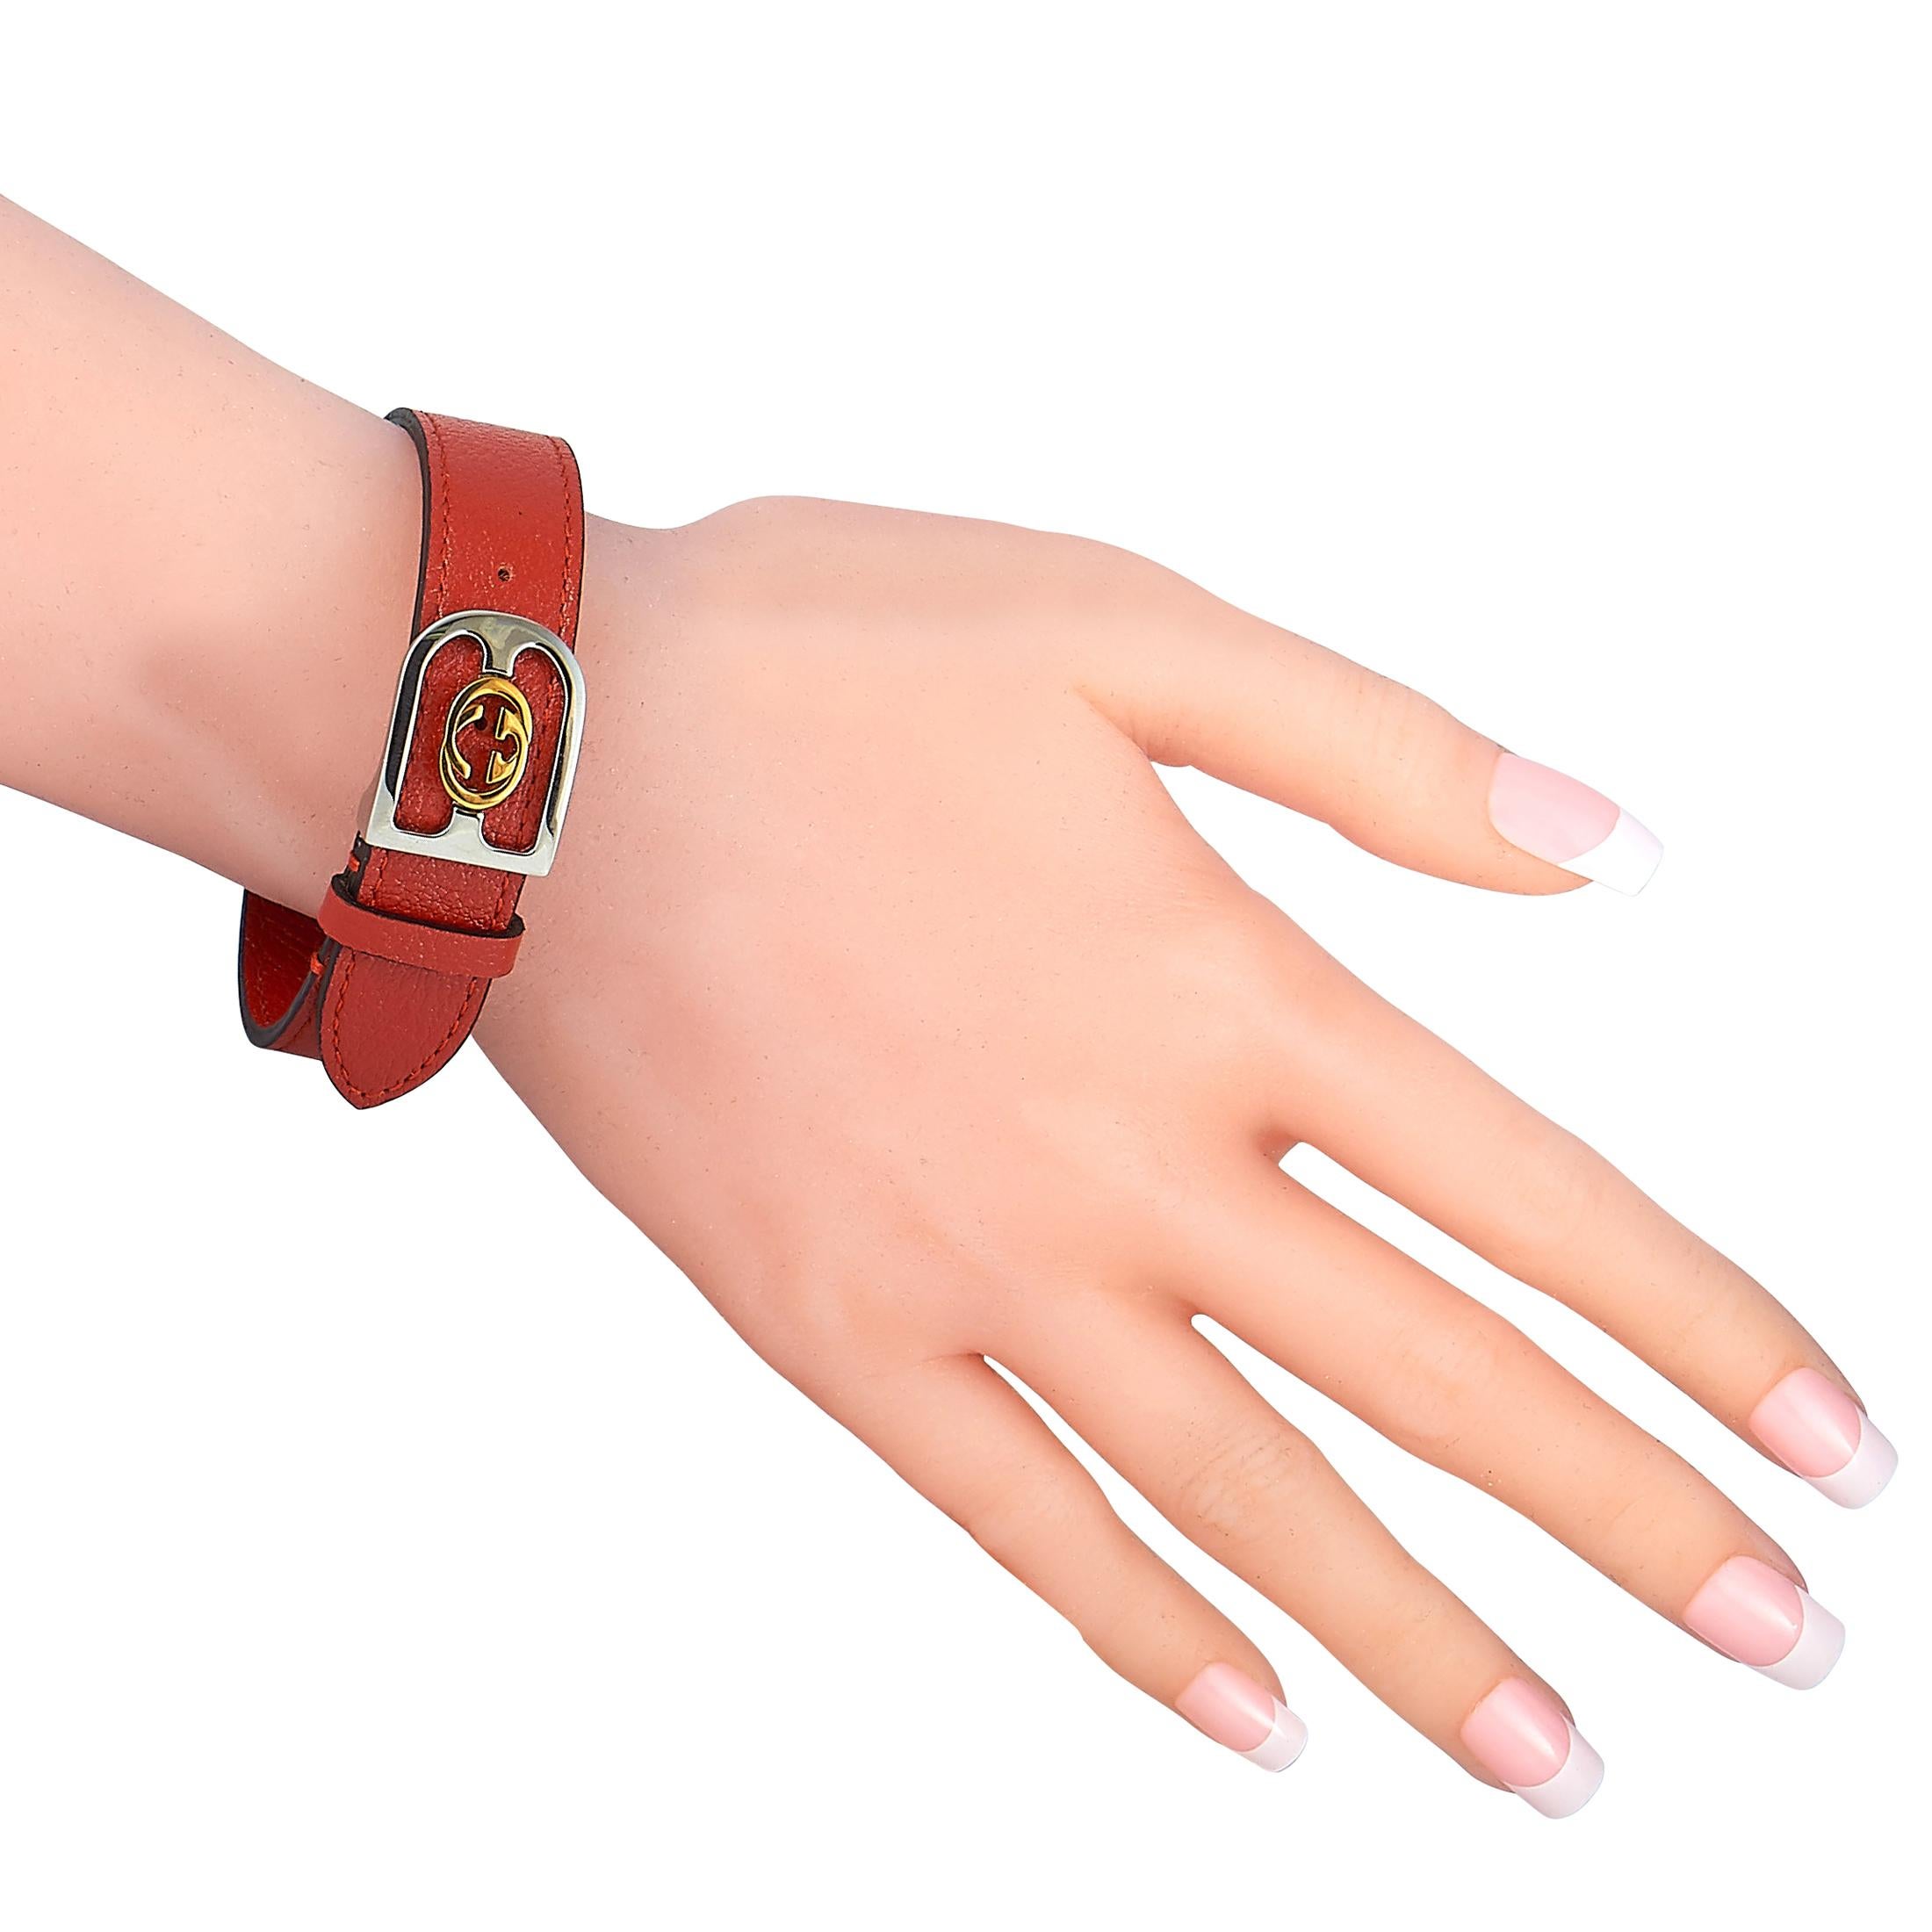 This Gucci bracelet is made of orange azalea leather and fitted with an 18K yellow gold and stainless steel deployment clasp, accentuated with the iconic Interlocking G logo. The bracelet weighs 17.6 grams and measures 8” in length.

Offered in